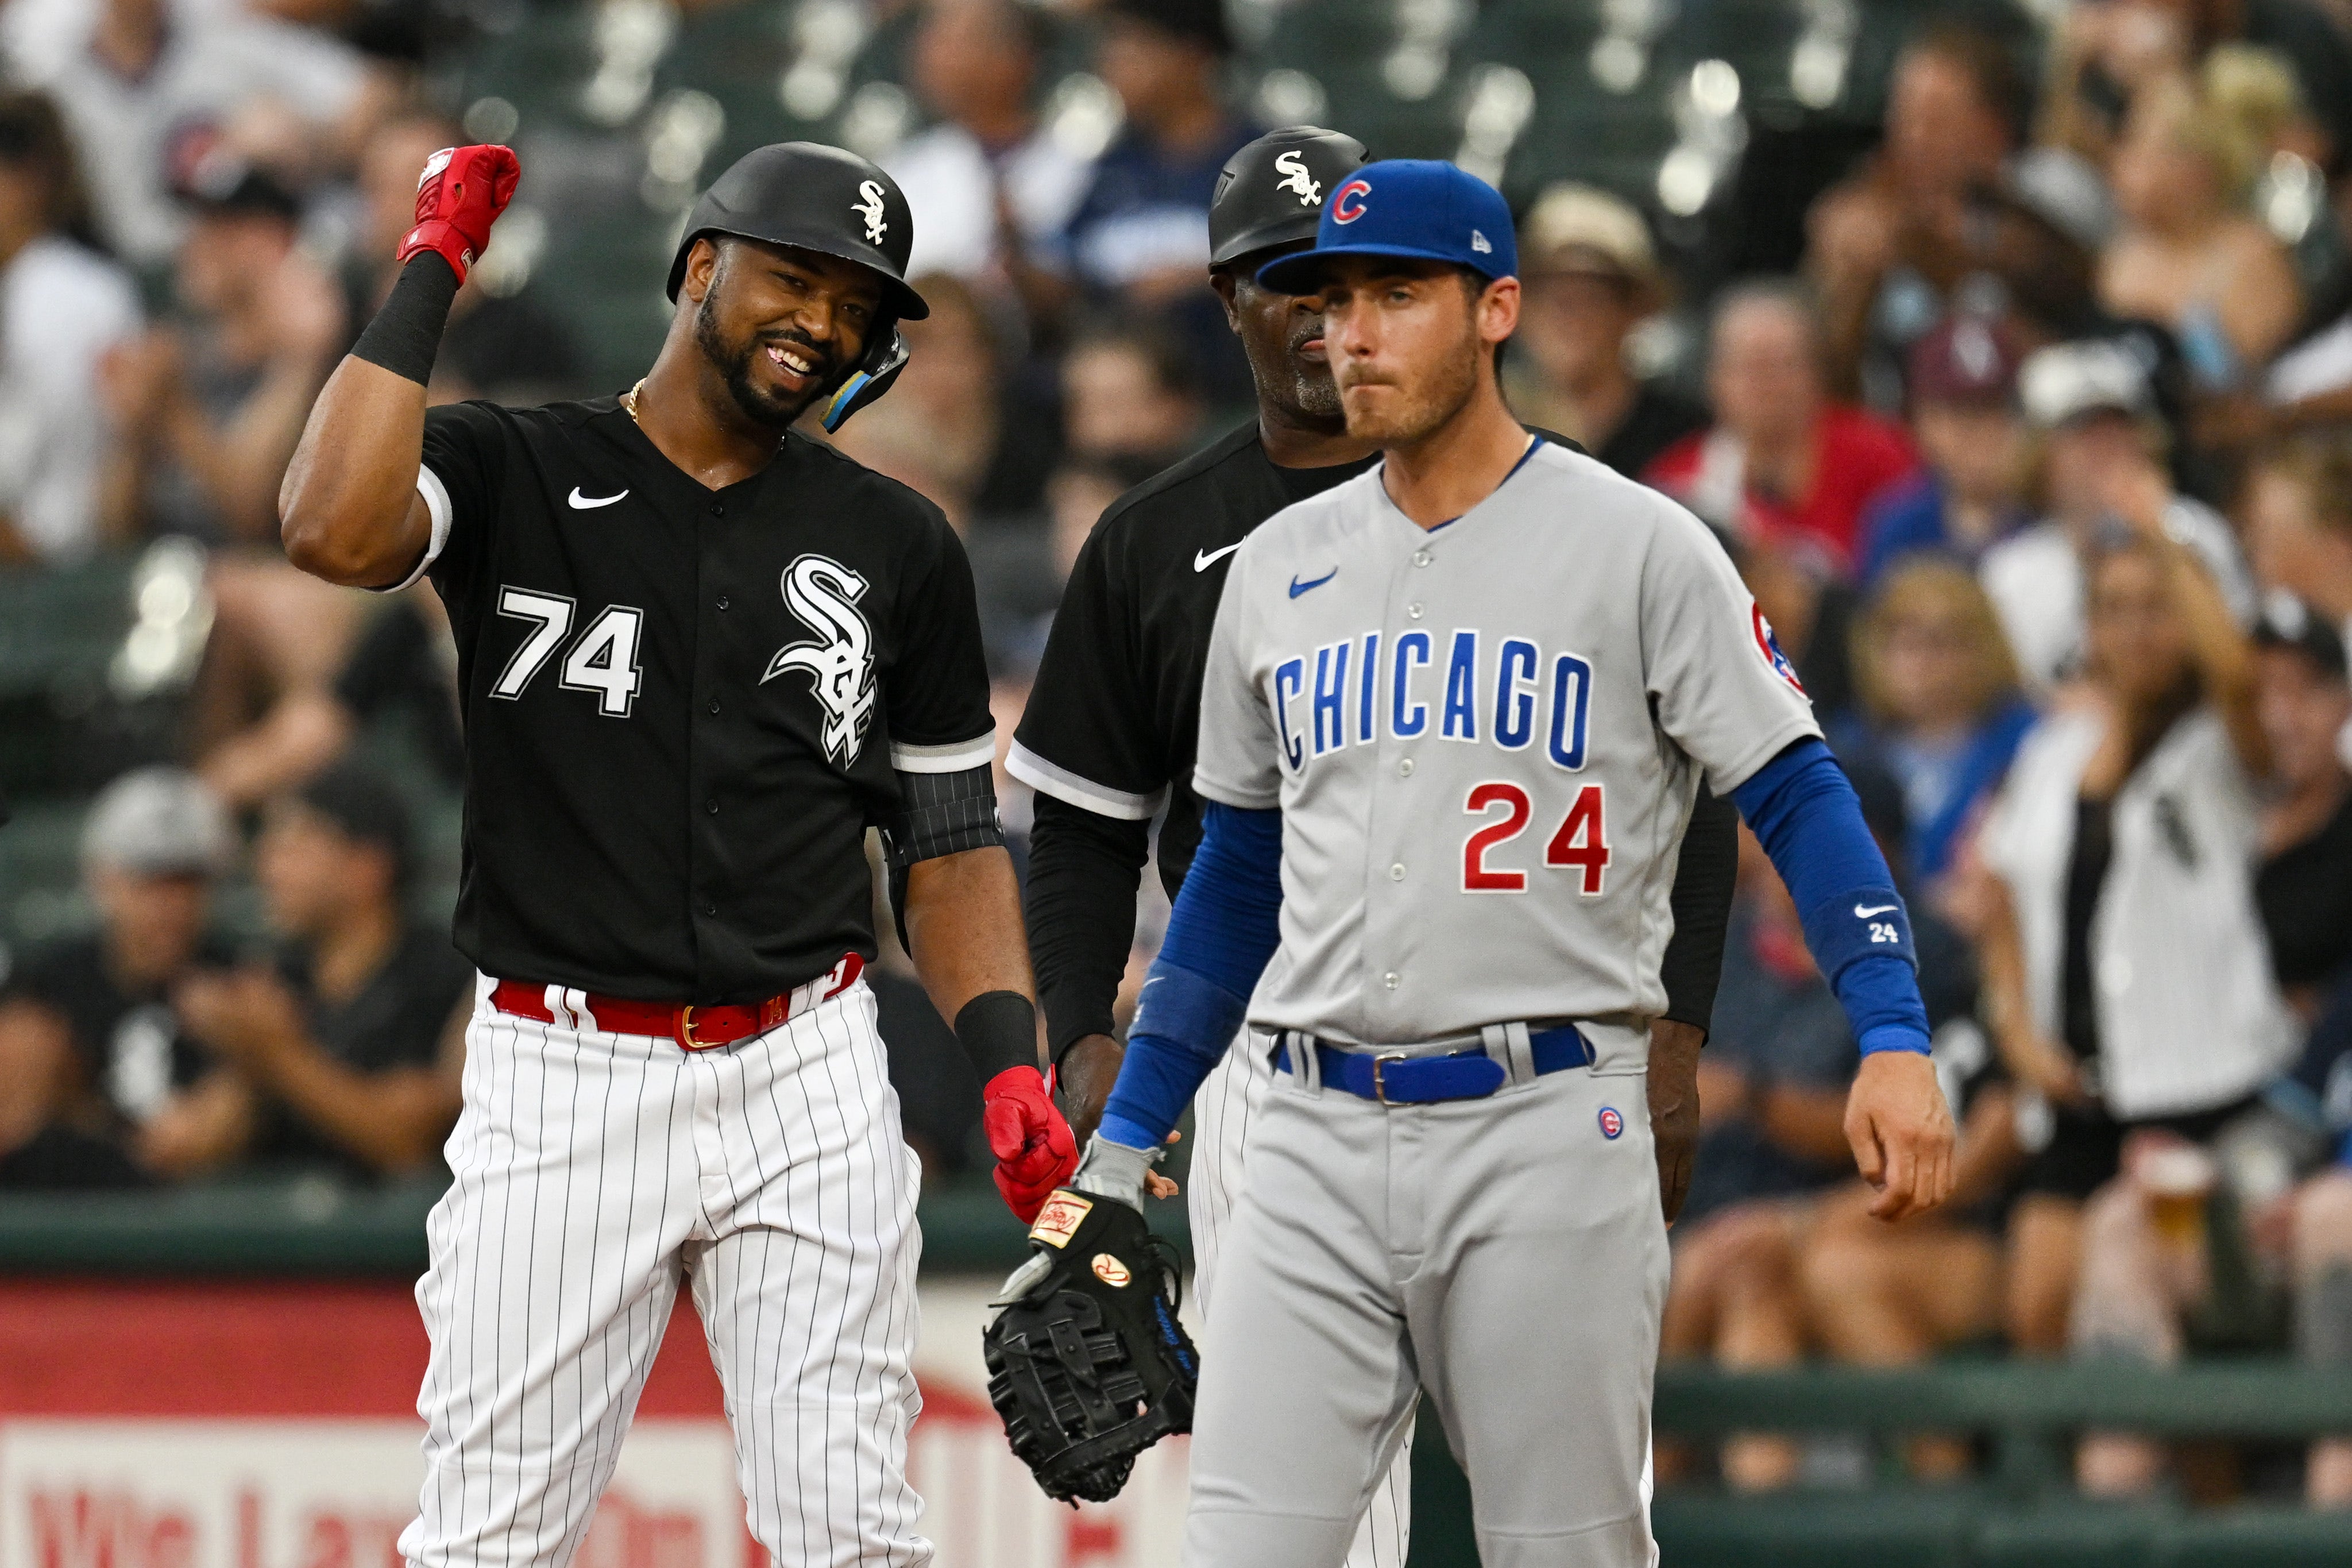 Chicago White Sox player reacts during game against Chicago Cubs